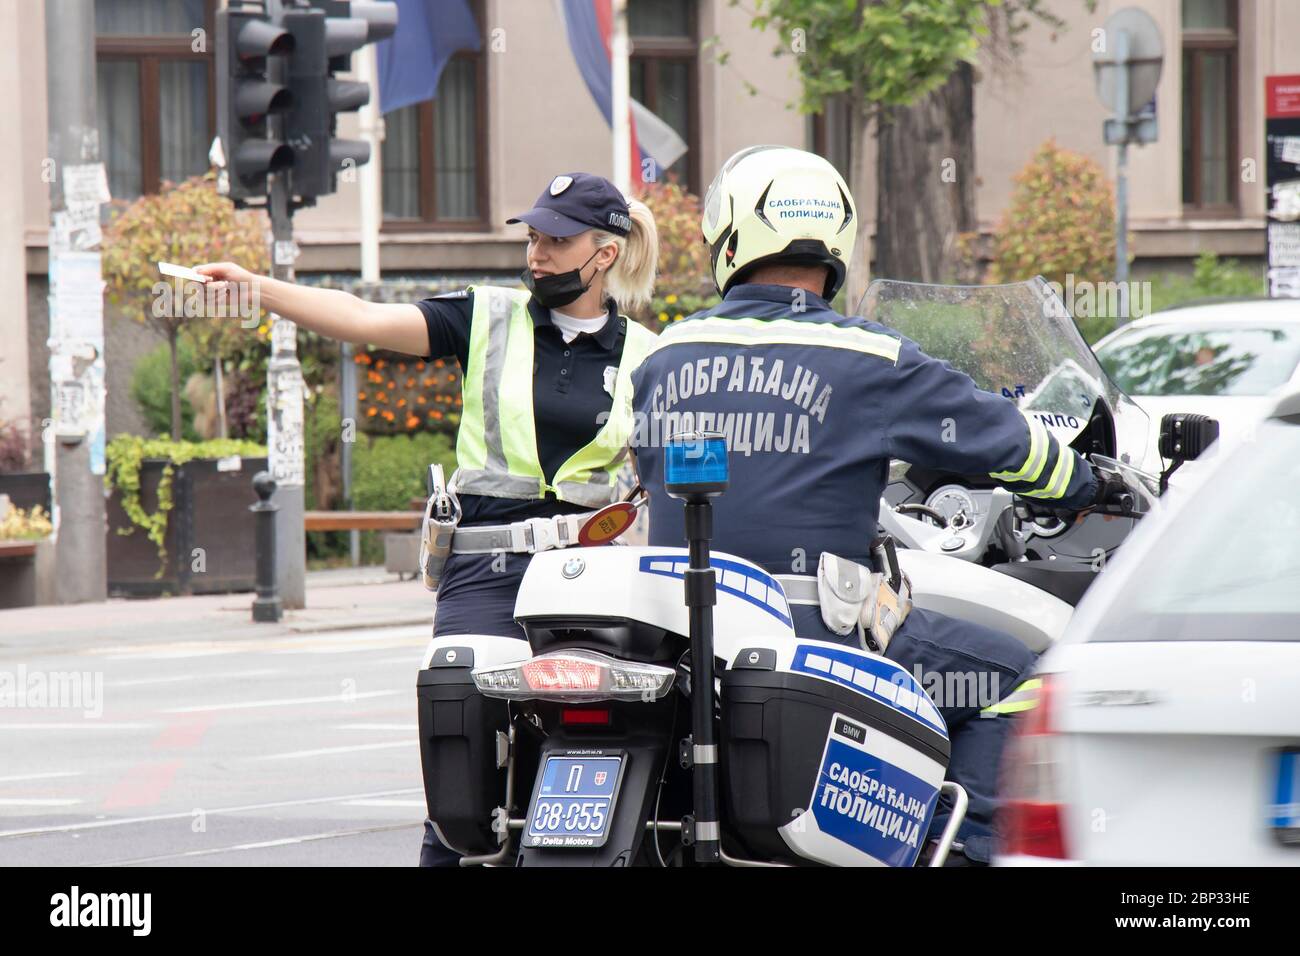 Belgrade, Serbia - May 15, 2020: Traffic policewoman and motor policeman on duty, standing in the intersection and talking Stock Photo